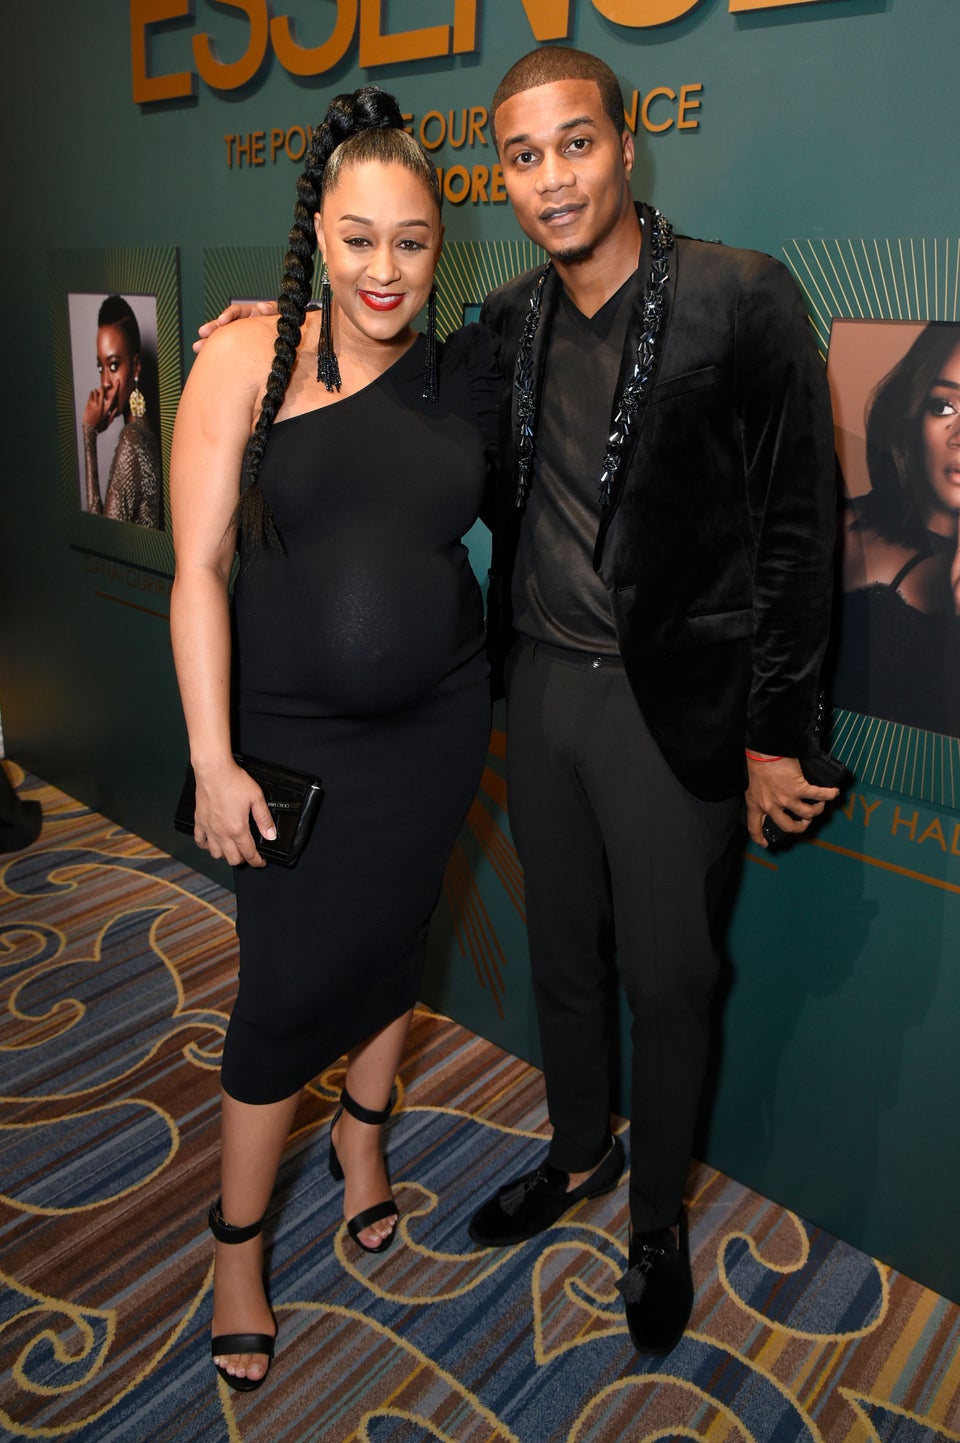 Cory Hardrict Can’t Stop Feeding Wife Tia Mowry-Hardrict To Satisfy Her Pregnancy Cravings